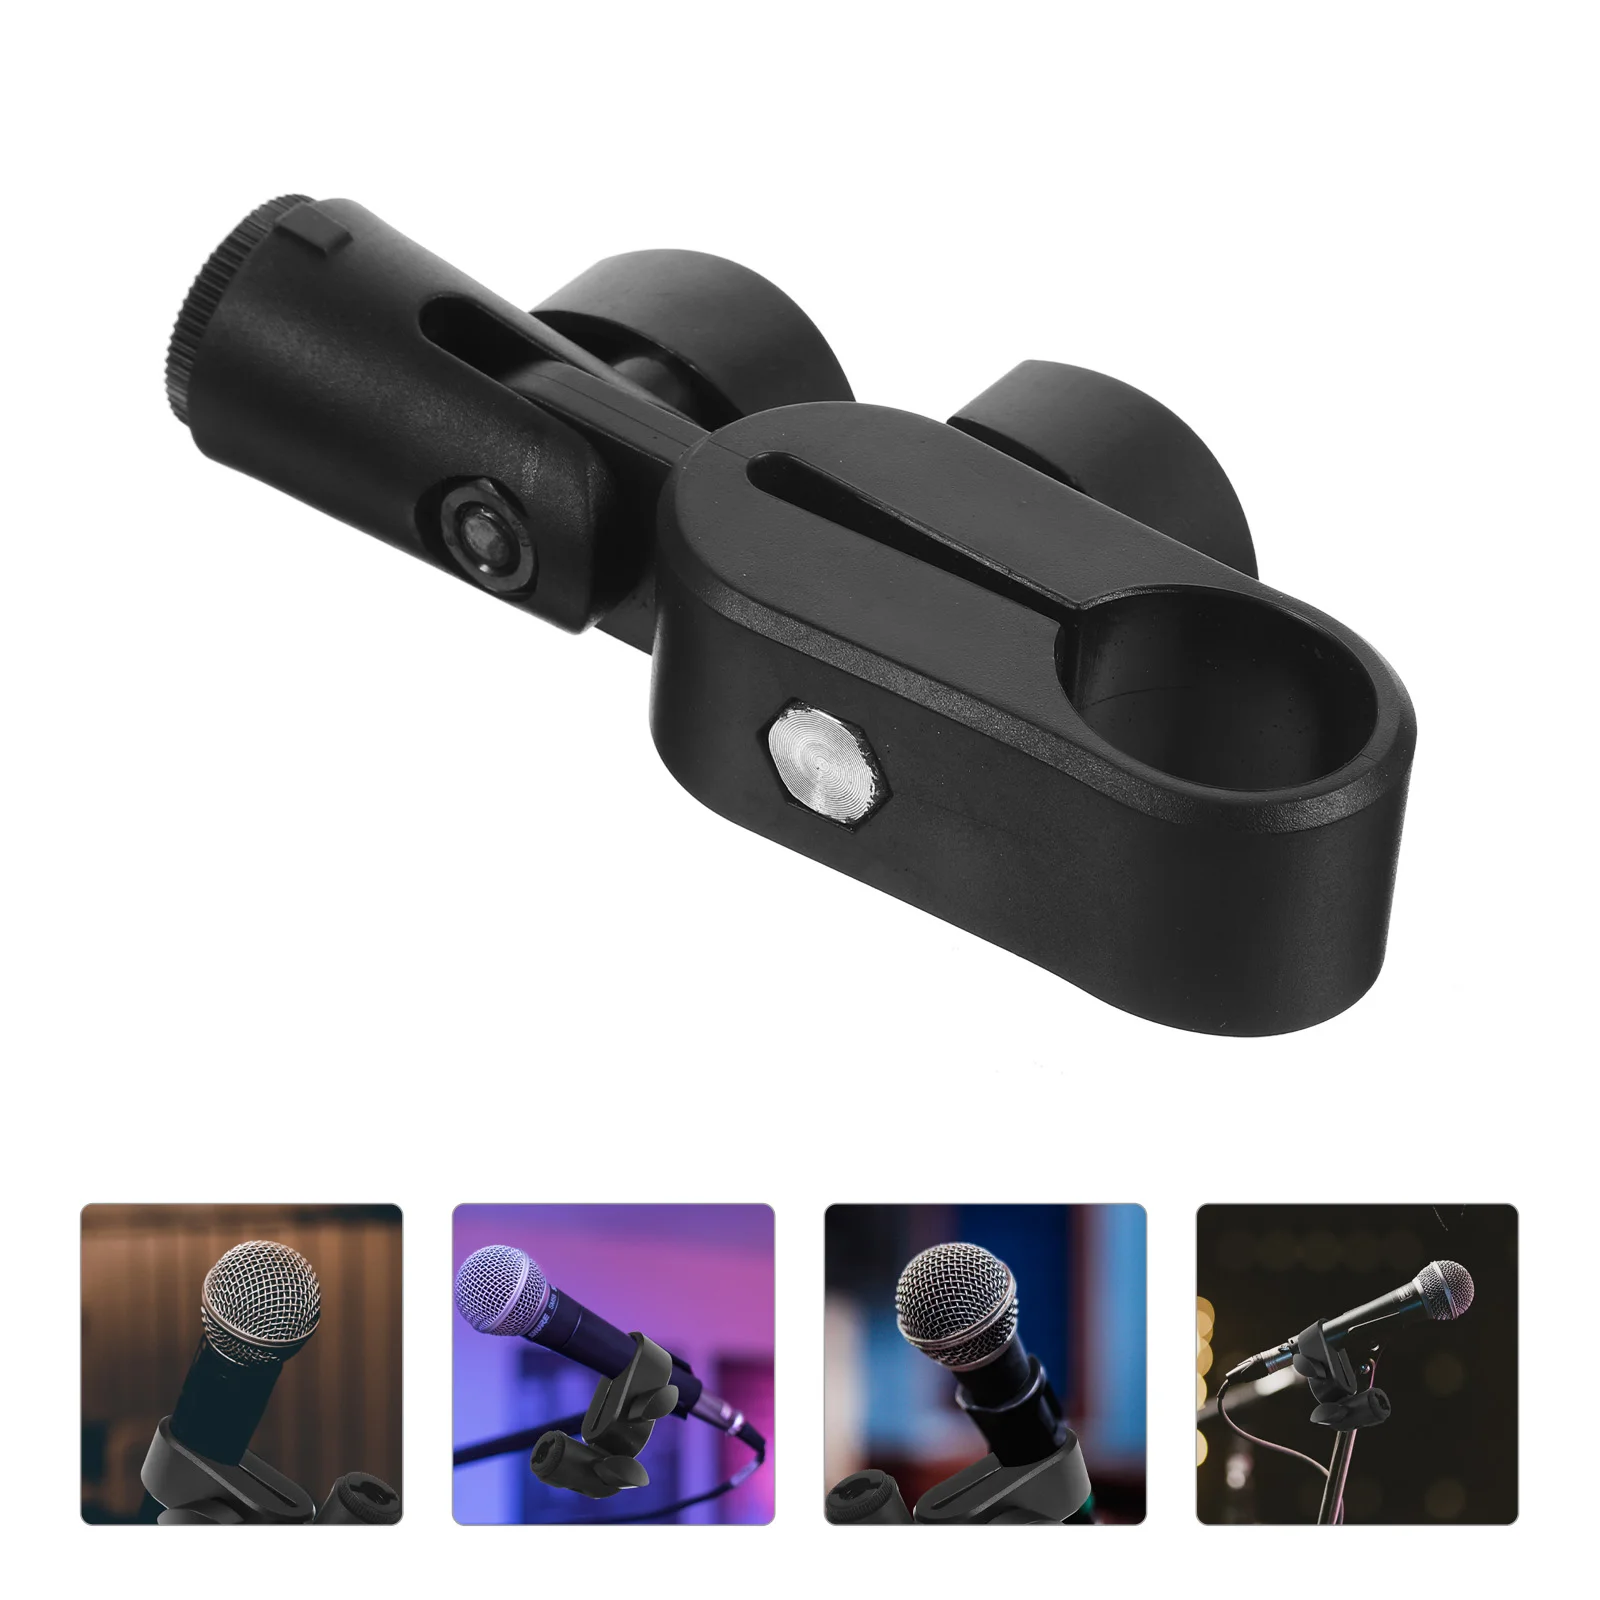 

Universal Microphone Clip Holder Wireless Clips Stand Microphones Stands Shock Mount